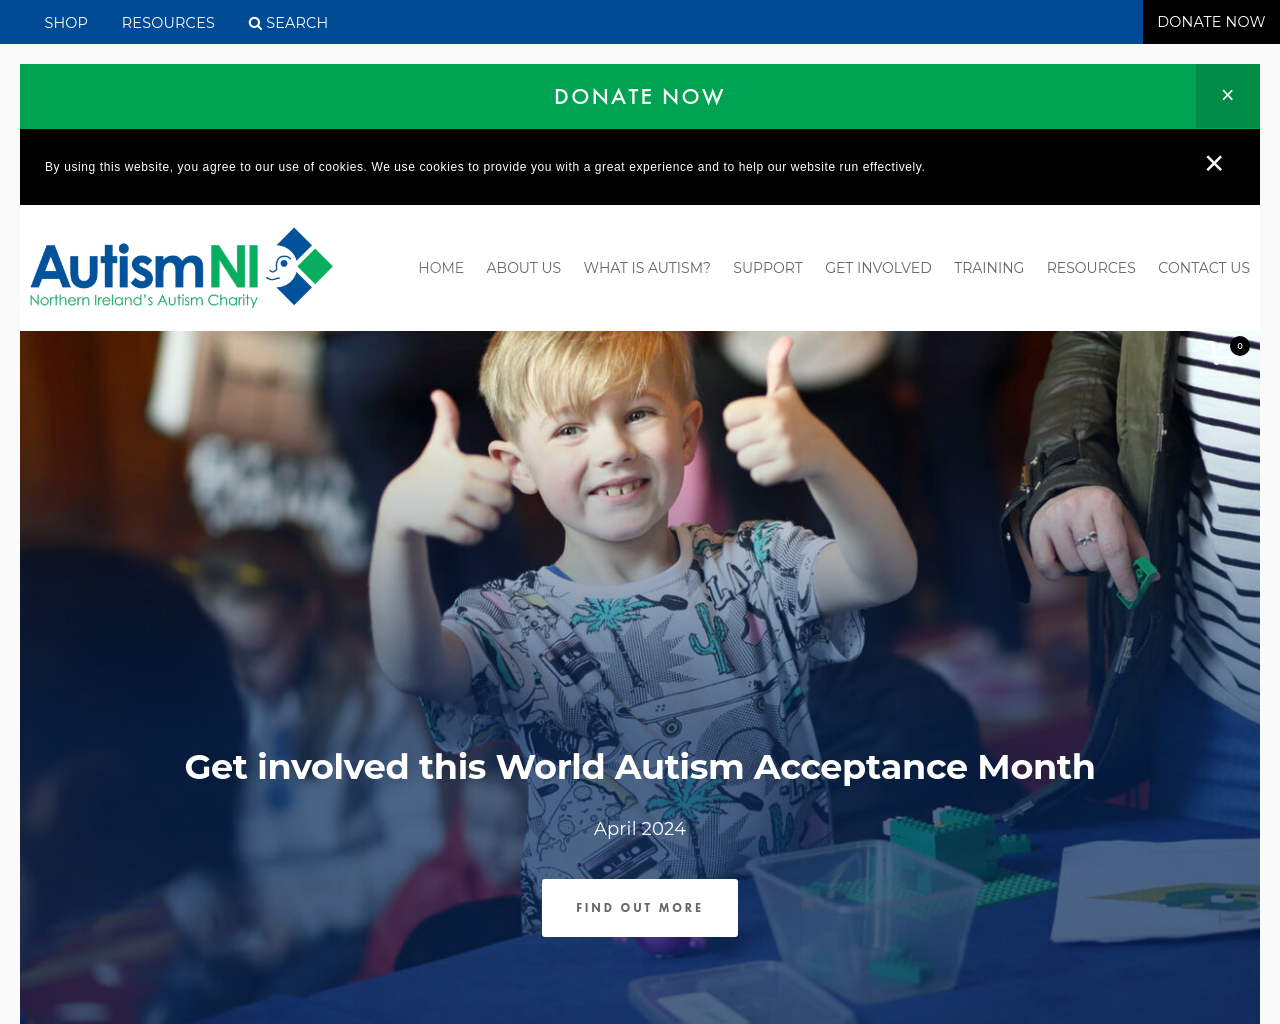 Autism help and support website